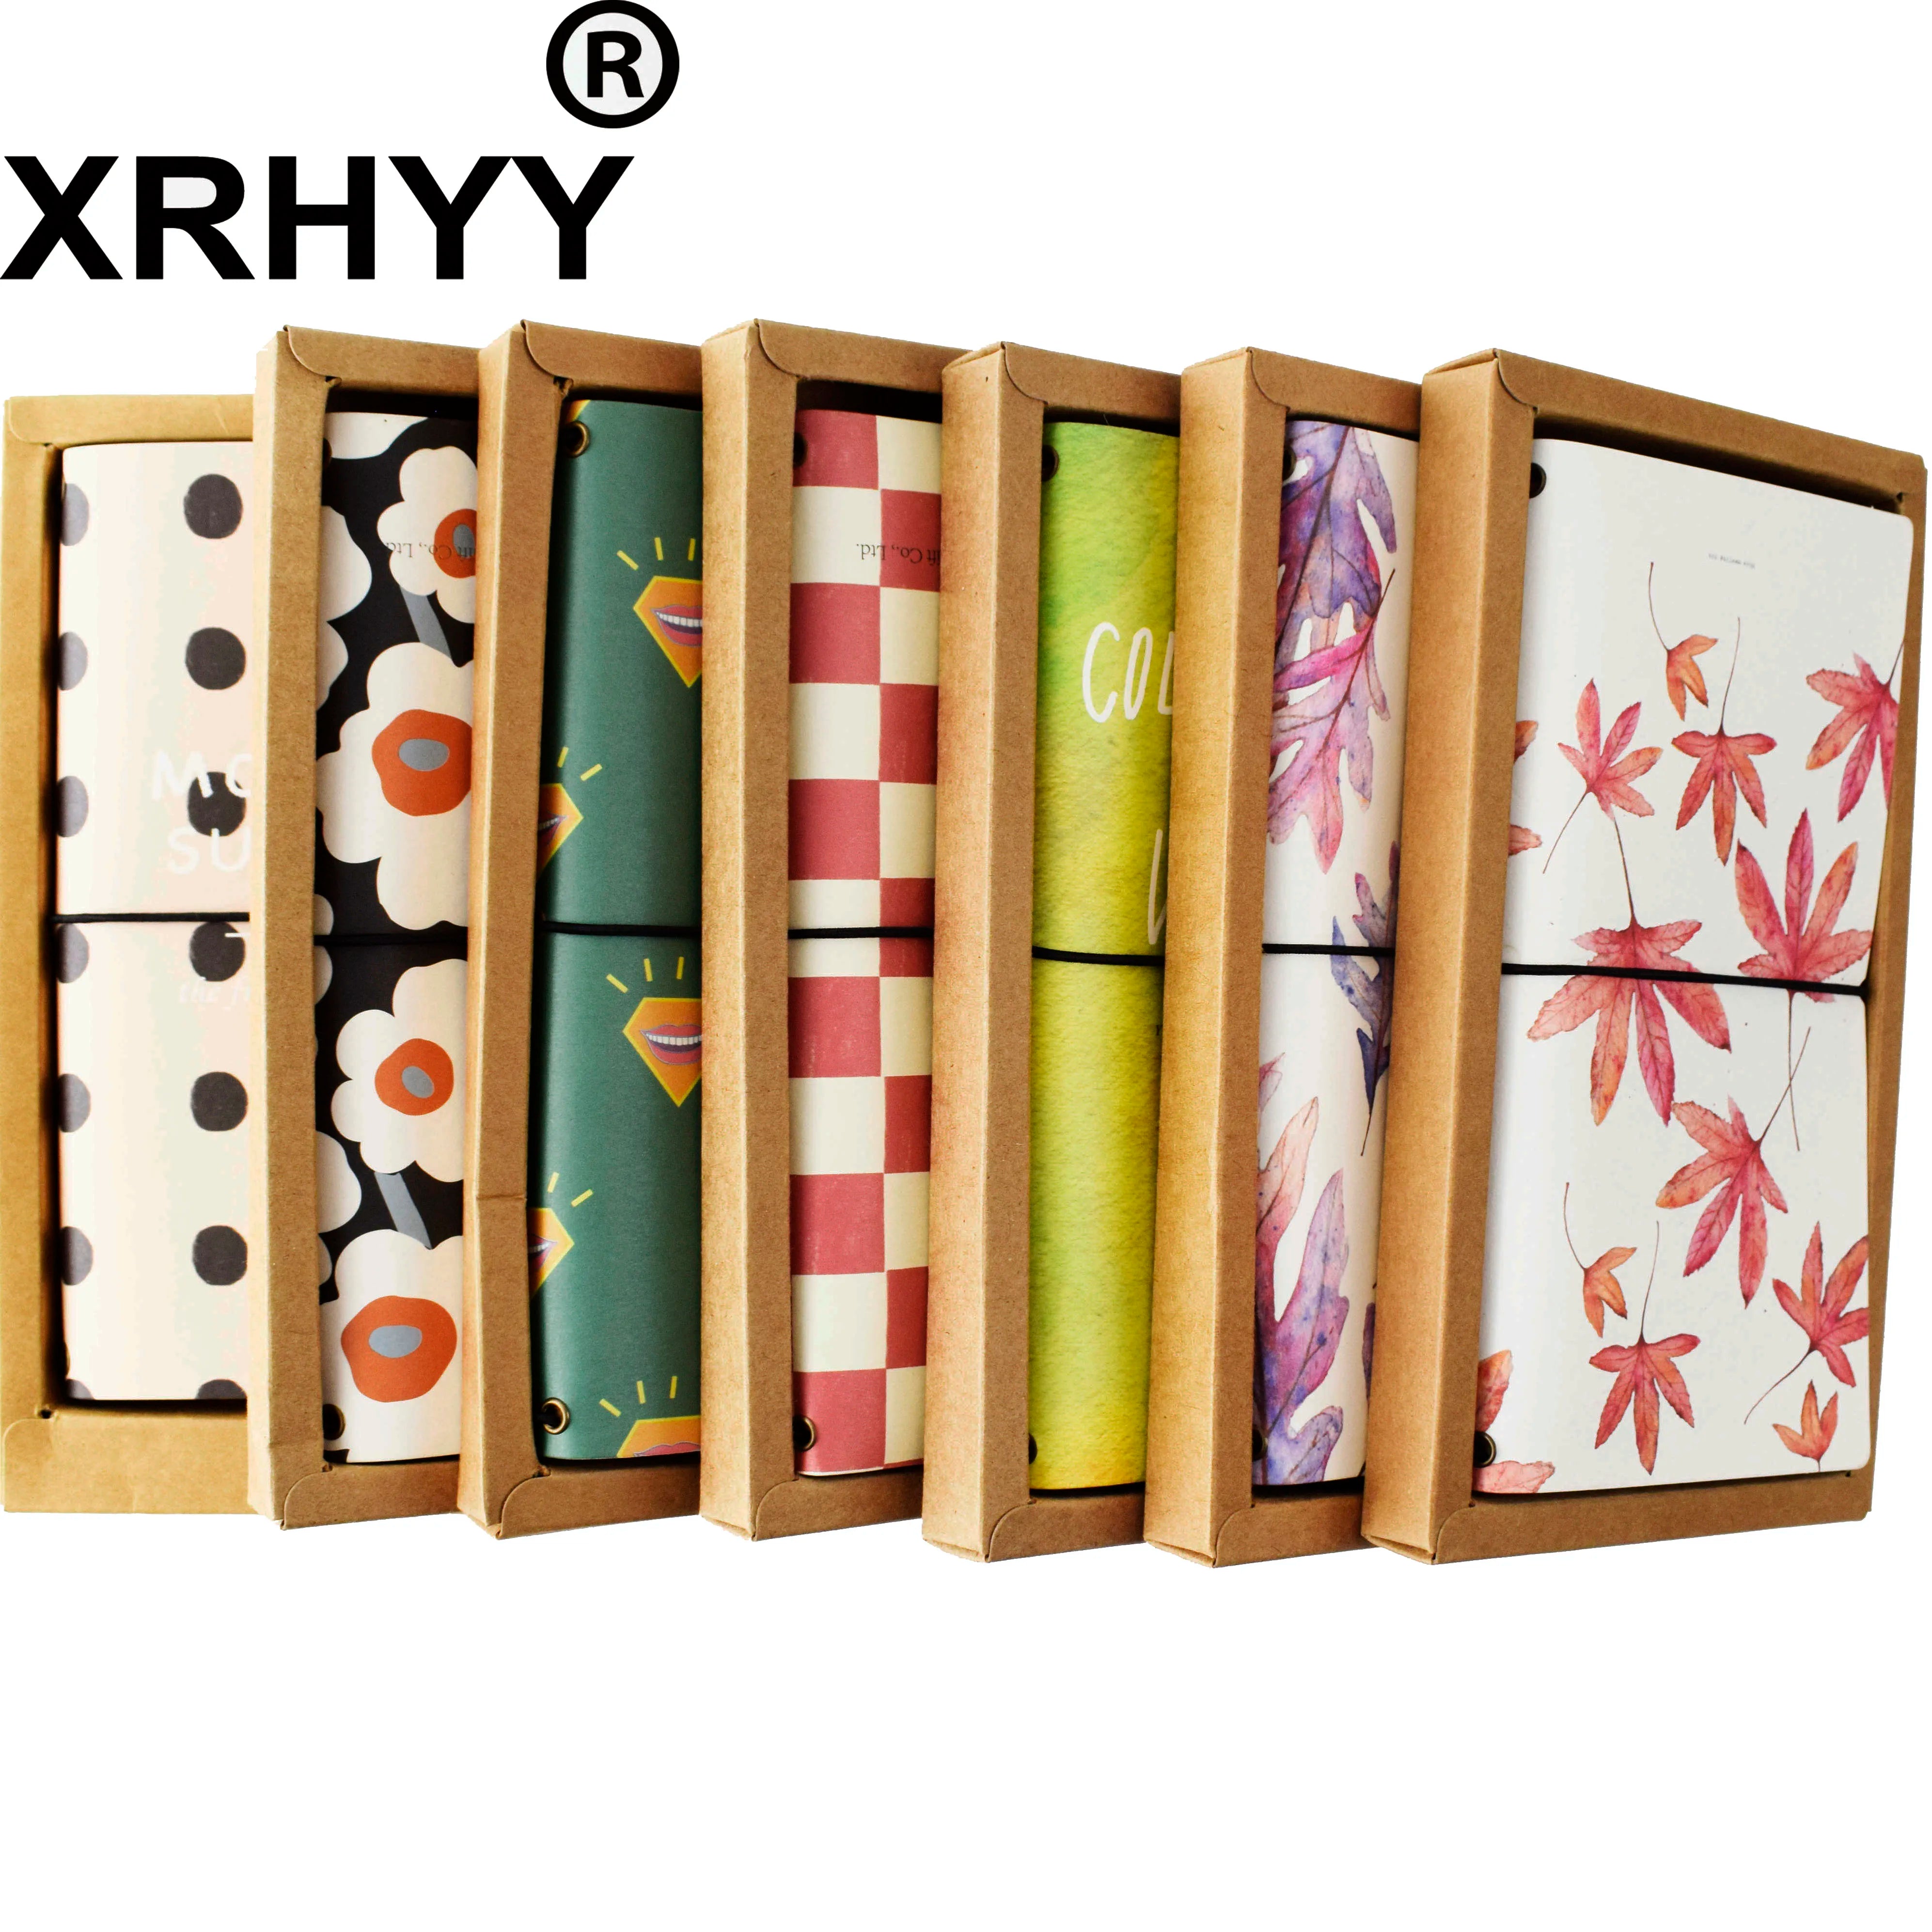 XRHYY Vintage Traveler's Notebook Hard Cover Planner Diary Book Exercise Composition Binding Notepad